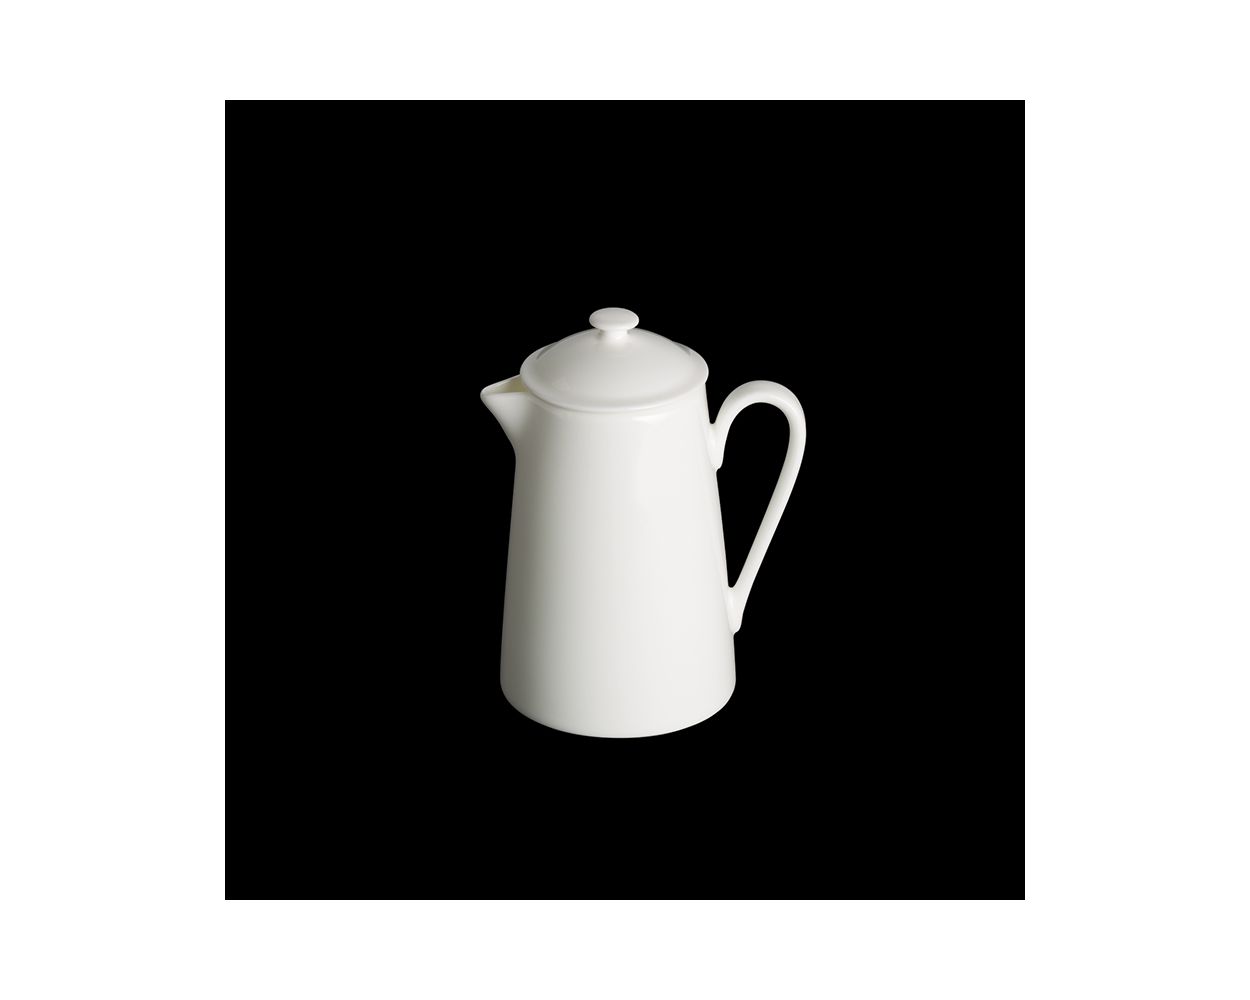 https://www.tableartonline.com/media/catalog/product/cache/73bc79859b07312d75dfc22d1ffe30f5/rdi/rdi/large-conical-creamer-with-lid_1.jpg